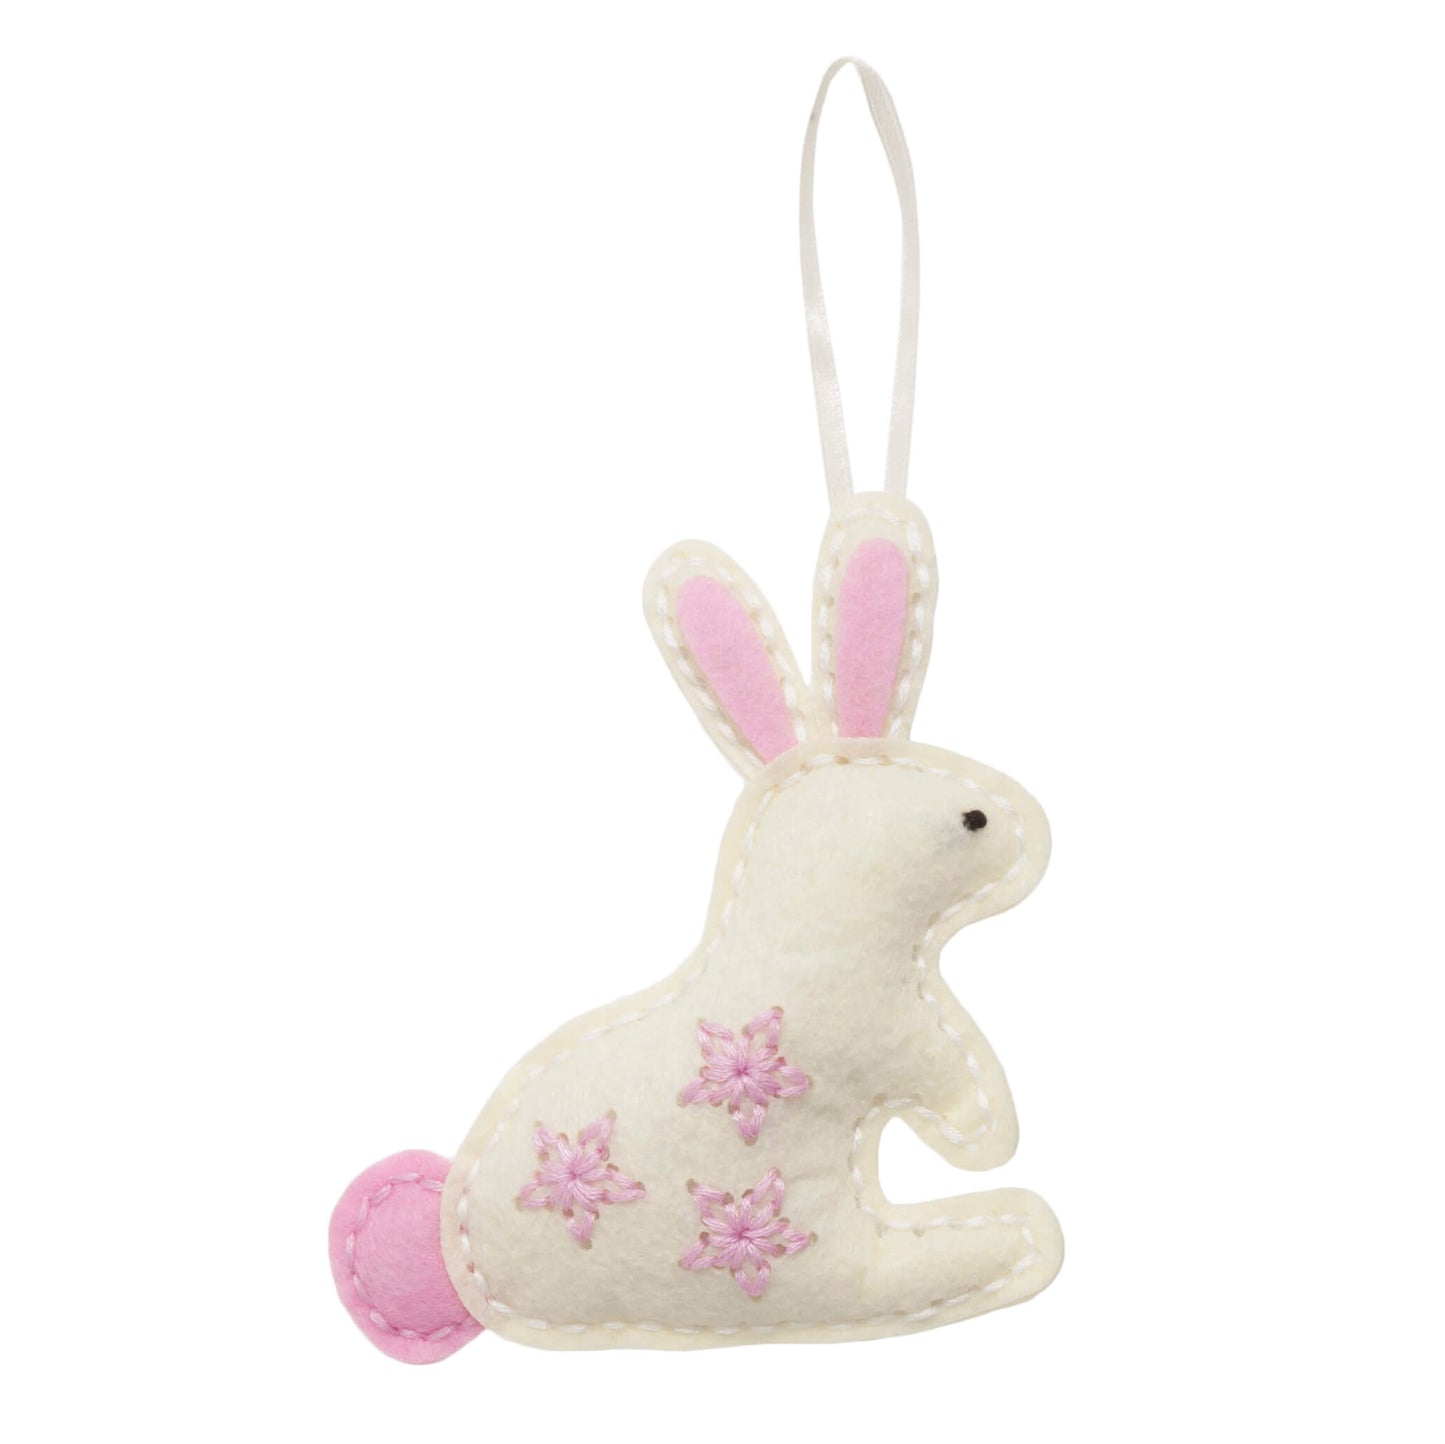 White bunny with pink ears, tails and pink stars on it's lower left body. The bunnies right ear has string attached to allow the hanging of the decoration. Approximate finished size: (d/w/h) 2.5 X 10.5 x 11.5cm.